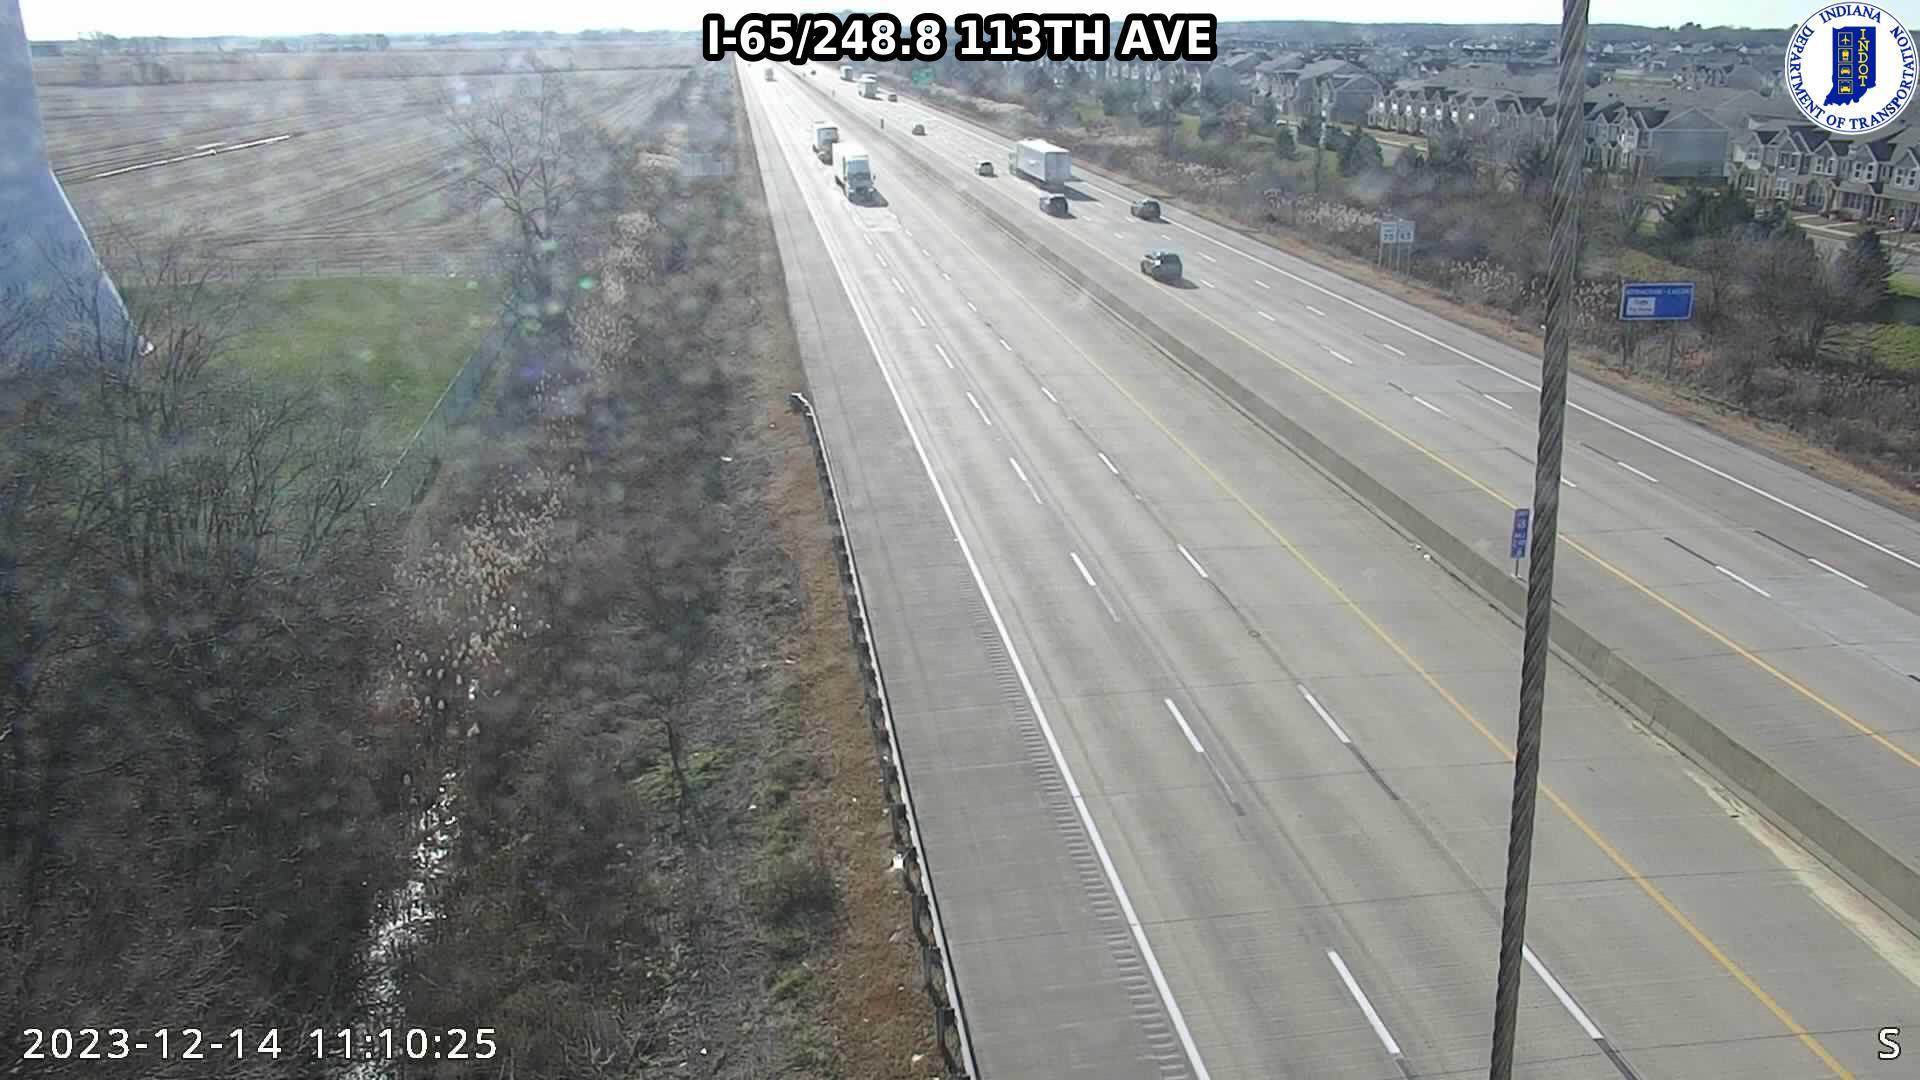 Traffic Cam Crown Point: I-65: I-65/248.8 113TH AVE : I-65/248.8 113TH AVE Player